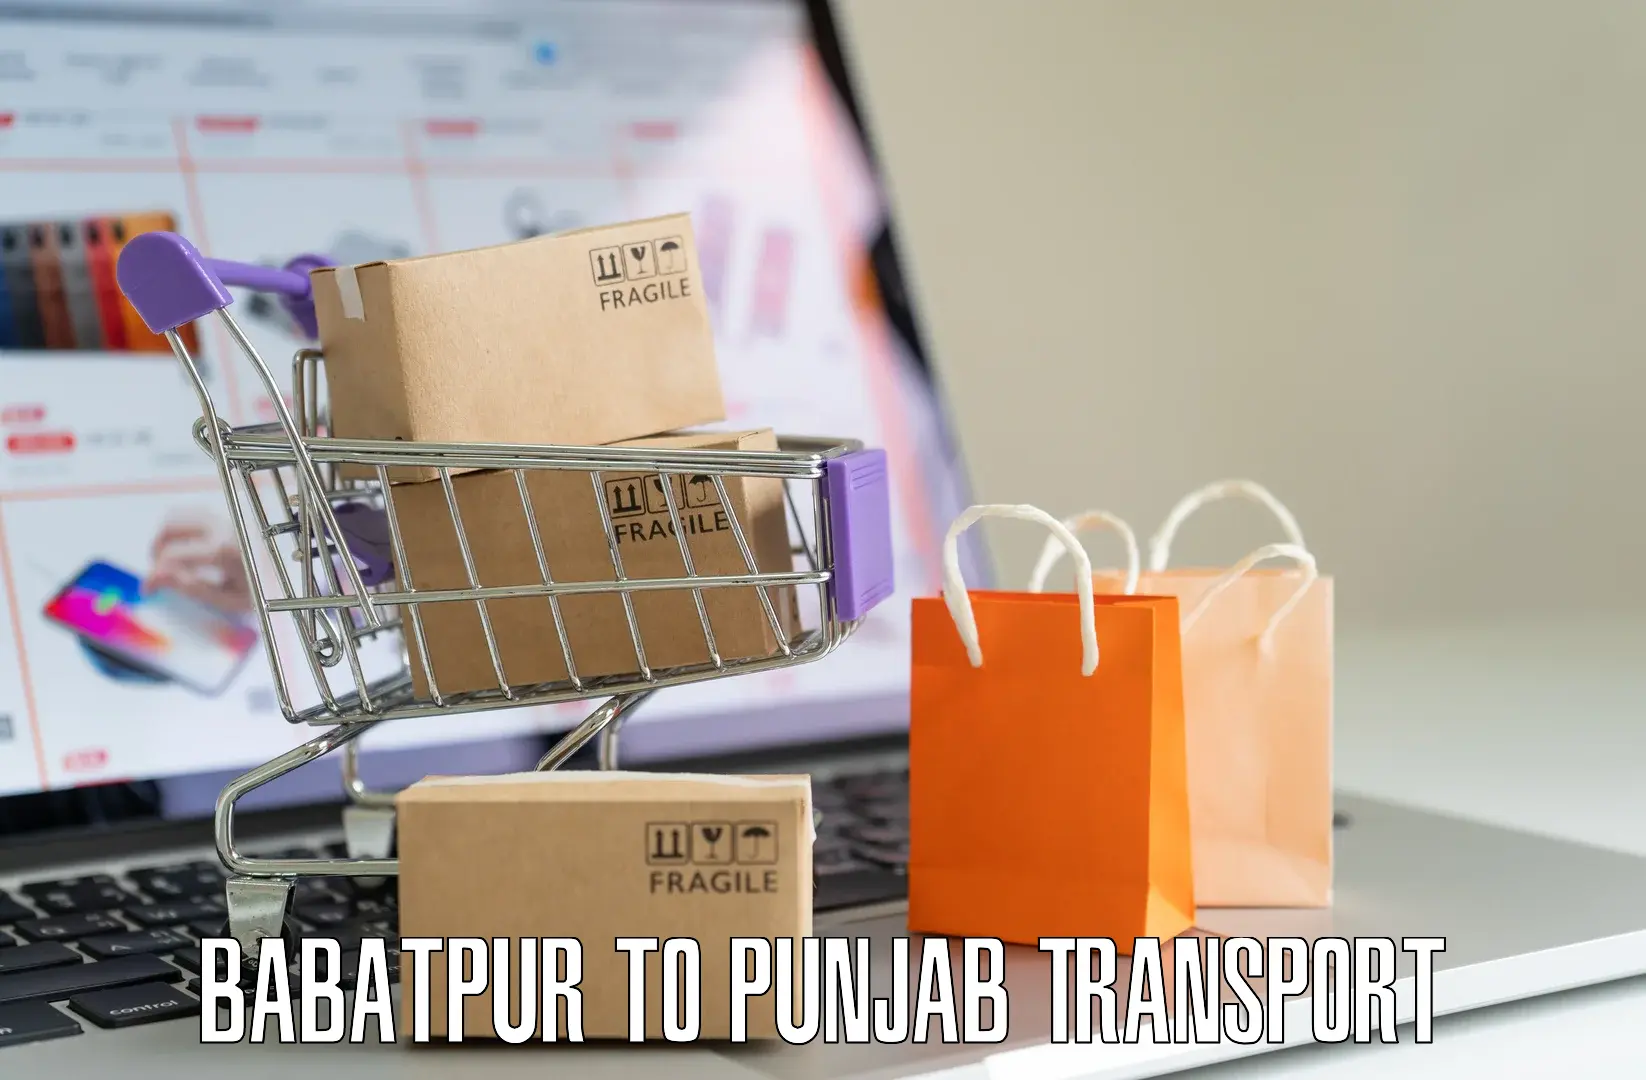 Delivery service Babatpur to Abohar